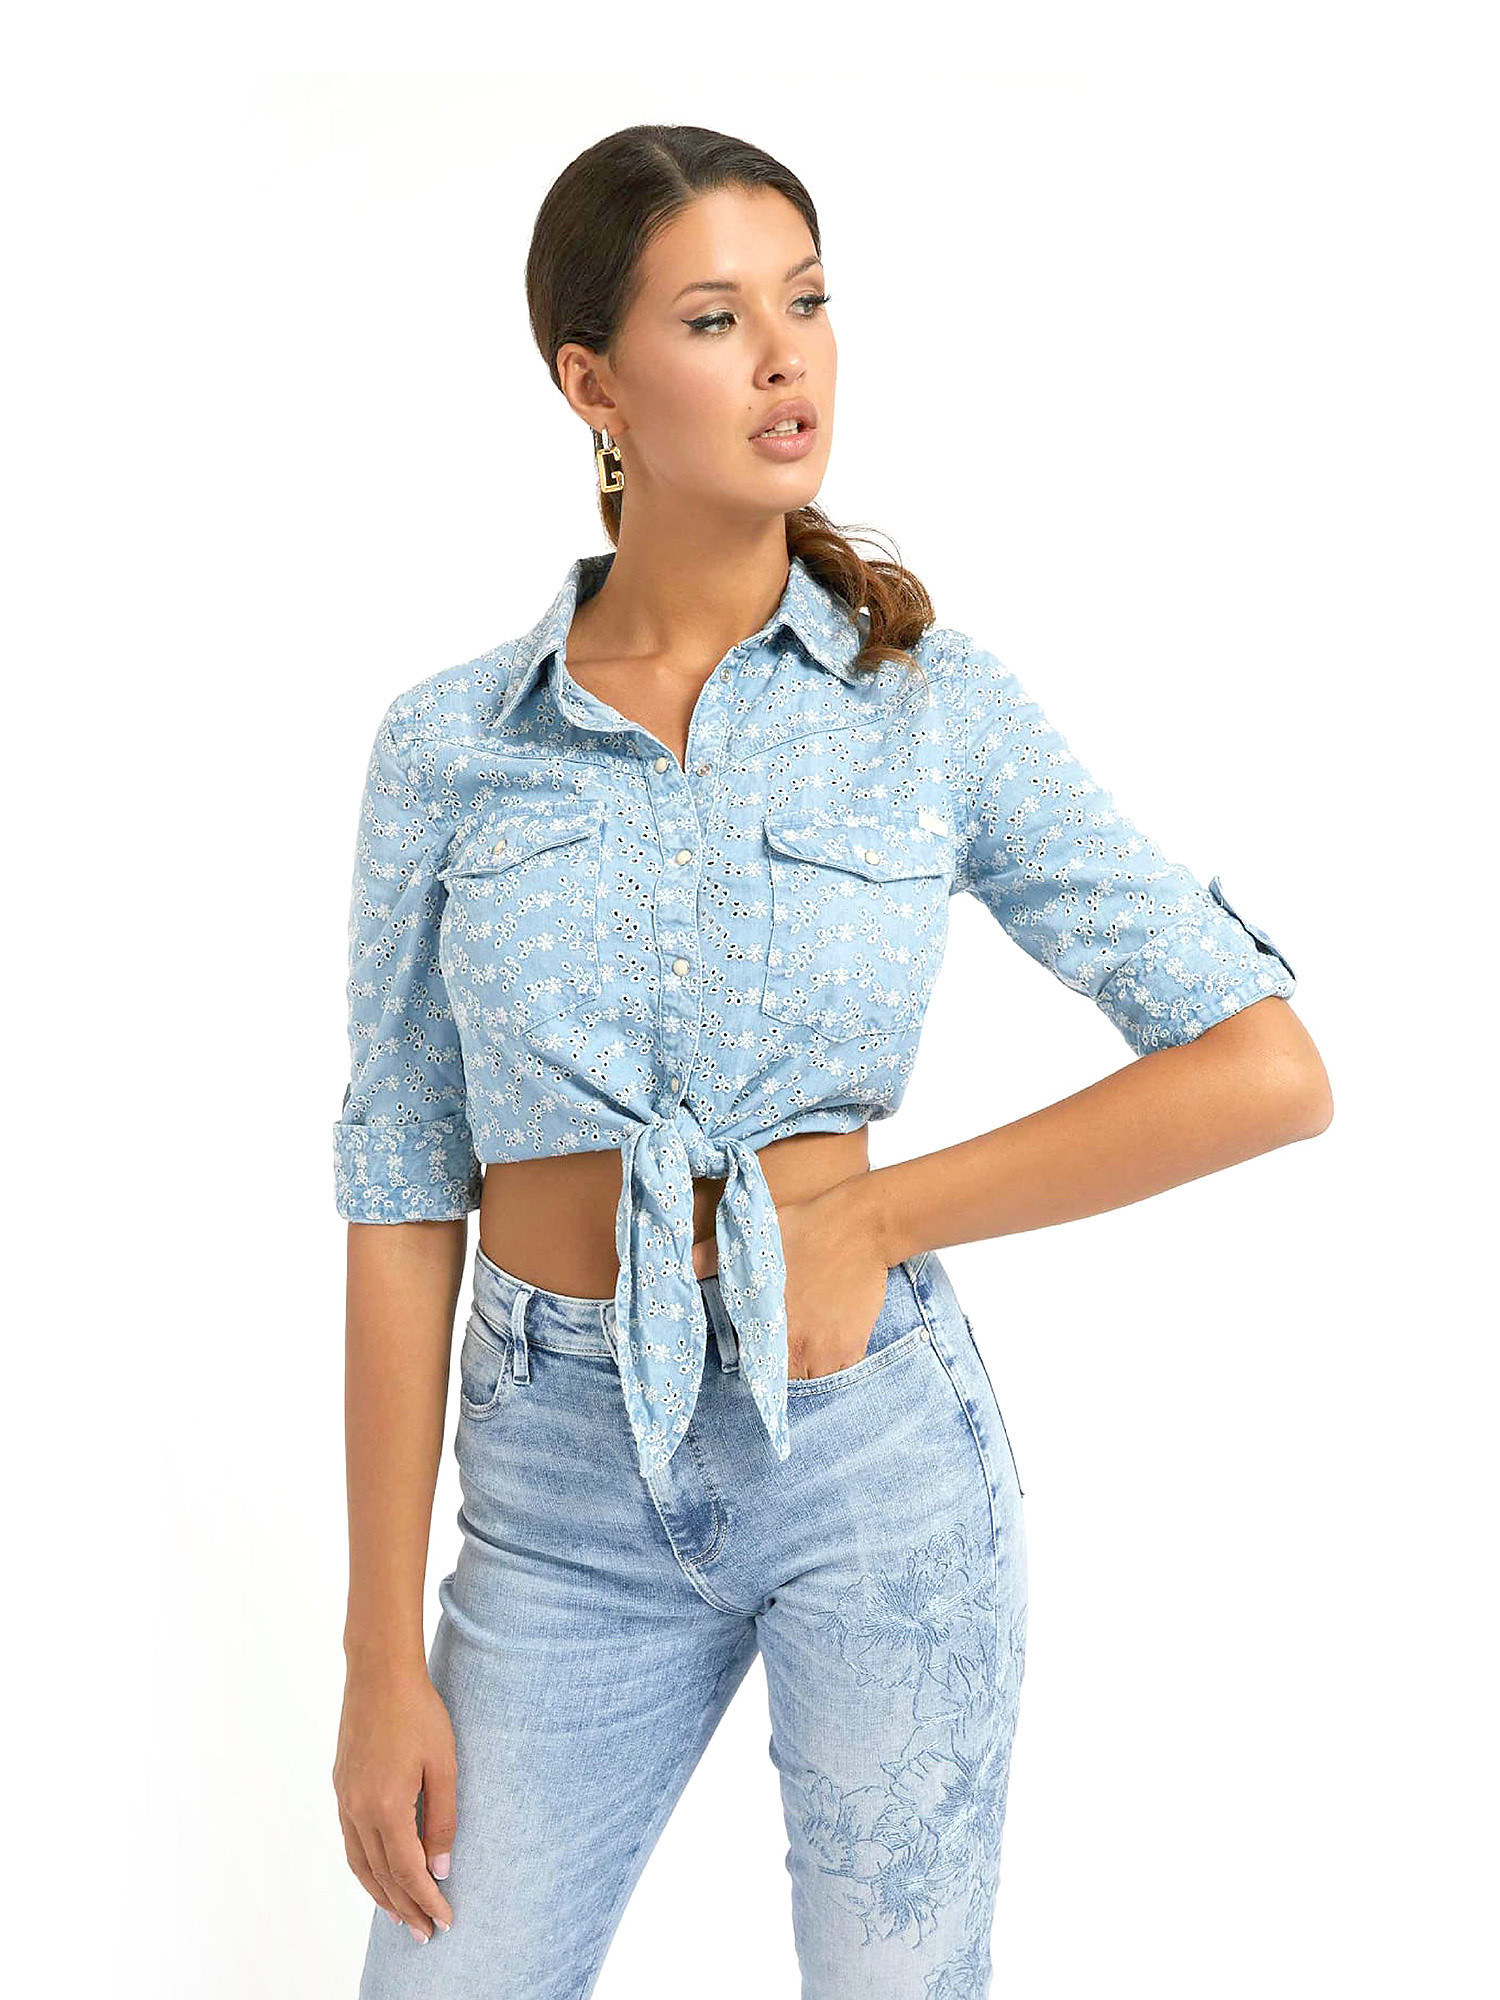 GUESS - Camicia in sangallo di jeans, Denim, large image number 2